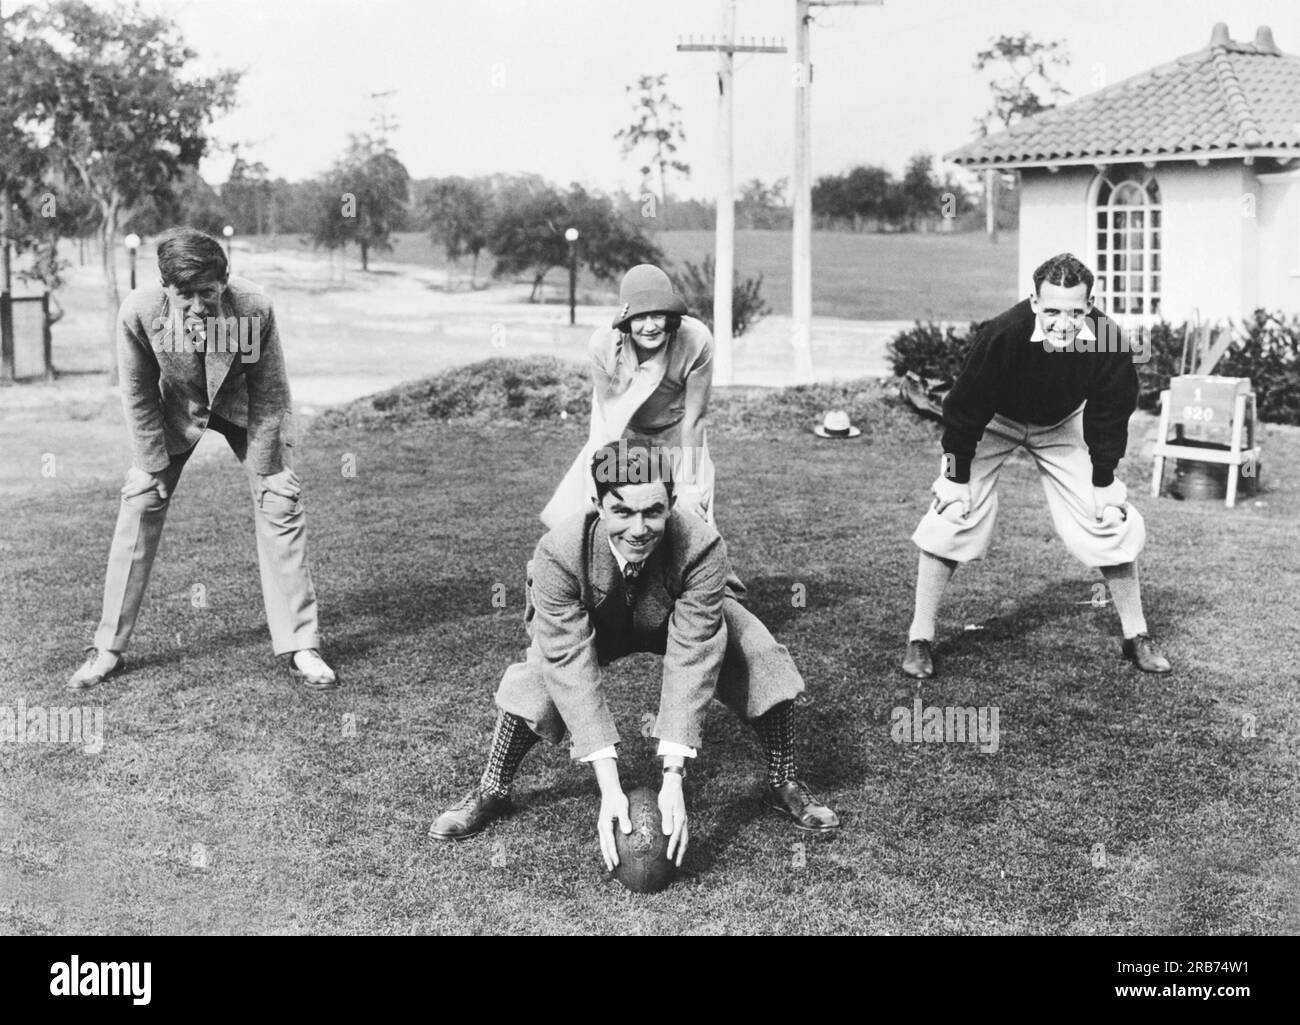 Tampa, Florida  January 7, 1926 Four of America's most famous sports stars give an athletic demonstration at the Temple Terrace Country Club. L-R: JIm Barnes, British Open Golf Champion; Helen Wainwright, Olympic diving and swimming medal winner, 'Red' Grange, football star; and center is Johny Farrell, professional golf champion. Stock Photo